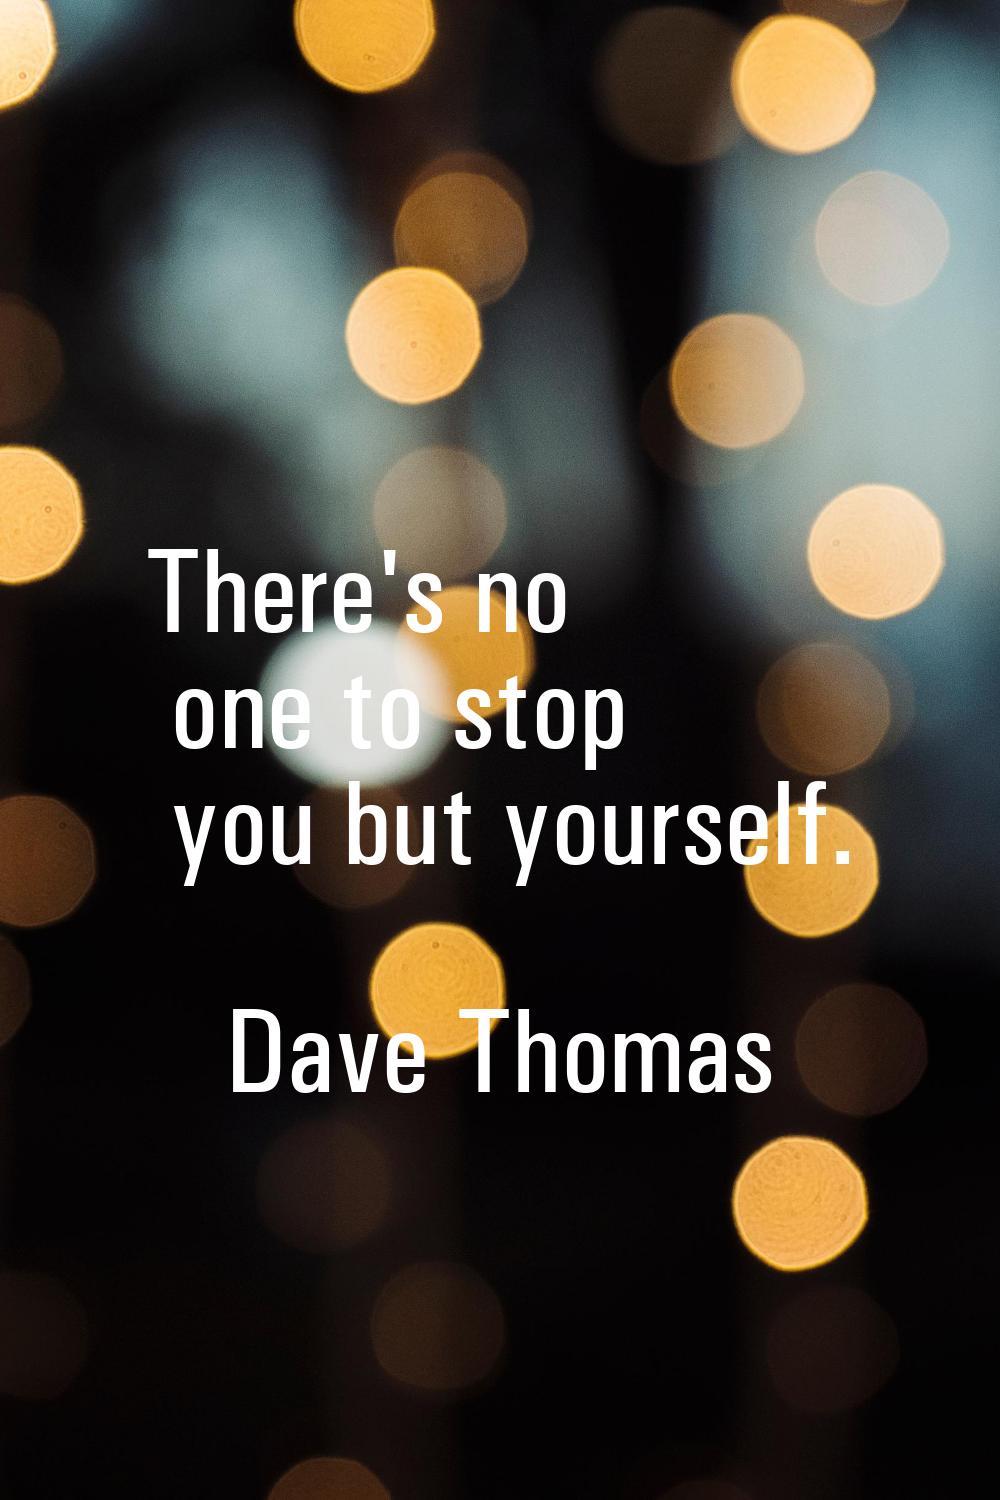 There's no one to stop you but yourself.